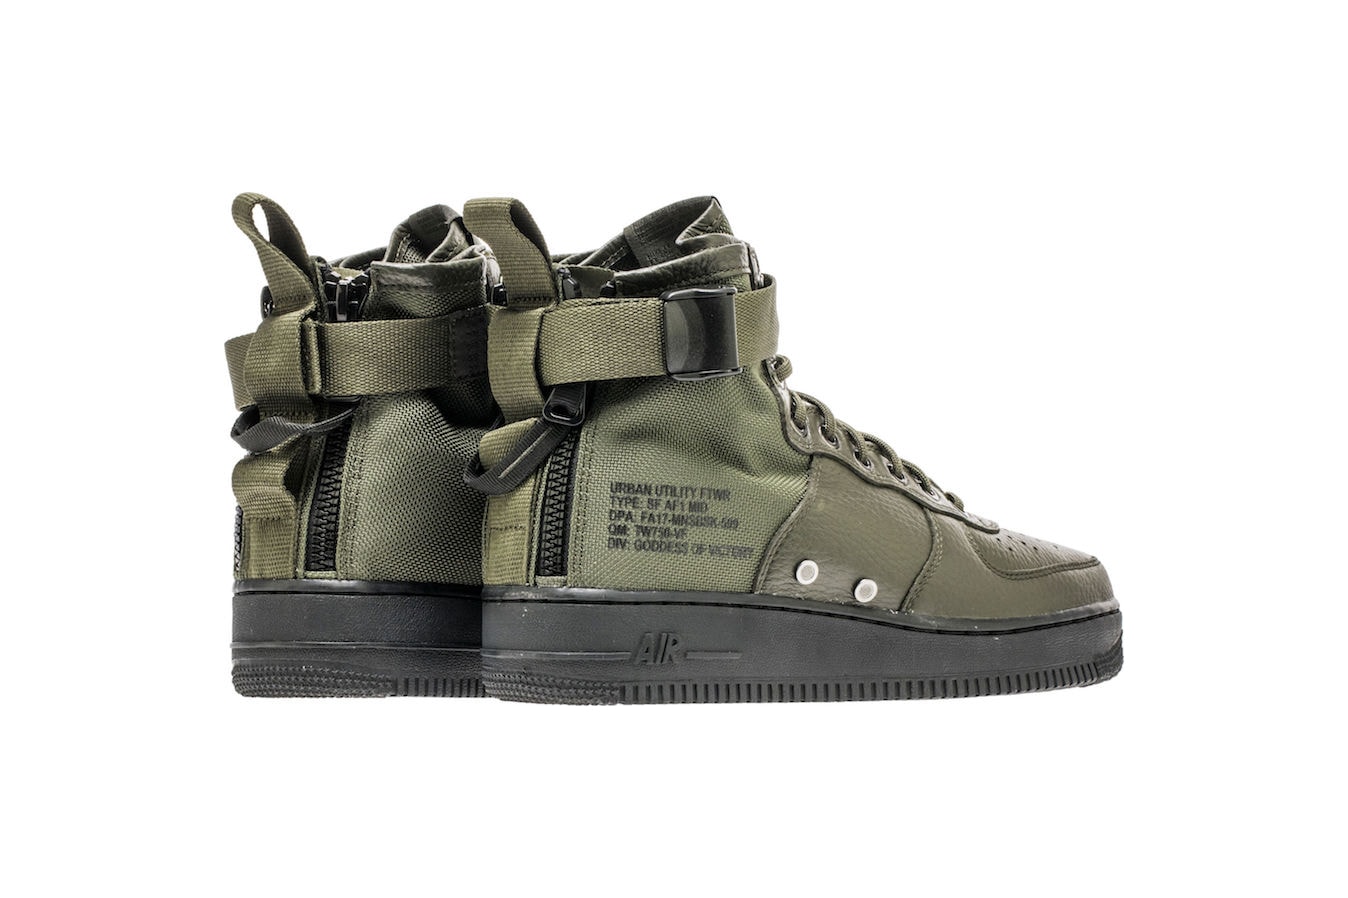 Nike Special Field Air Force 1 SF-AF1 Mid Sequoia Colorway Military Green Olive